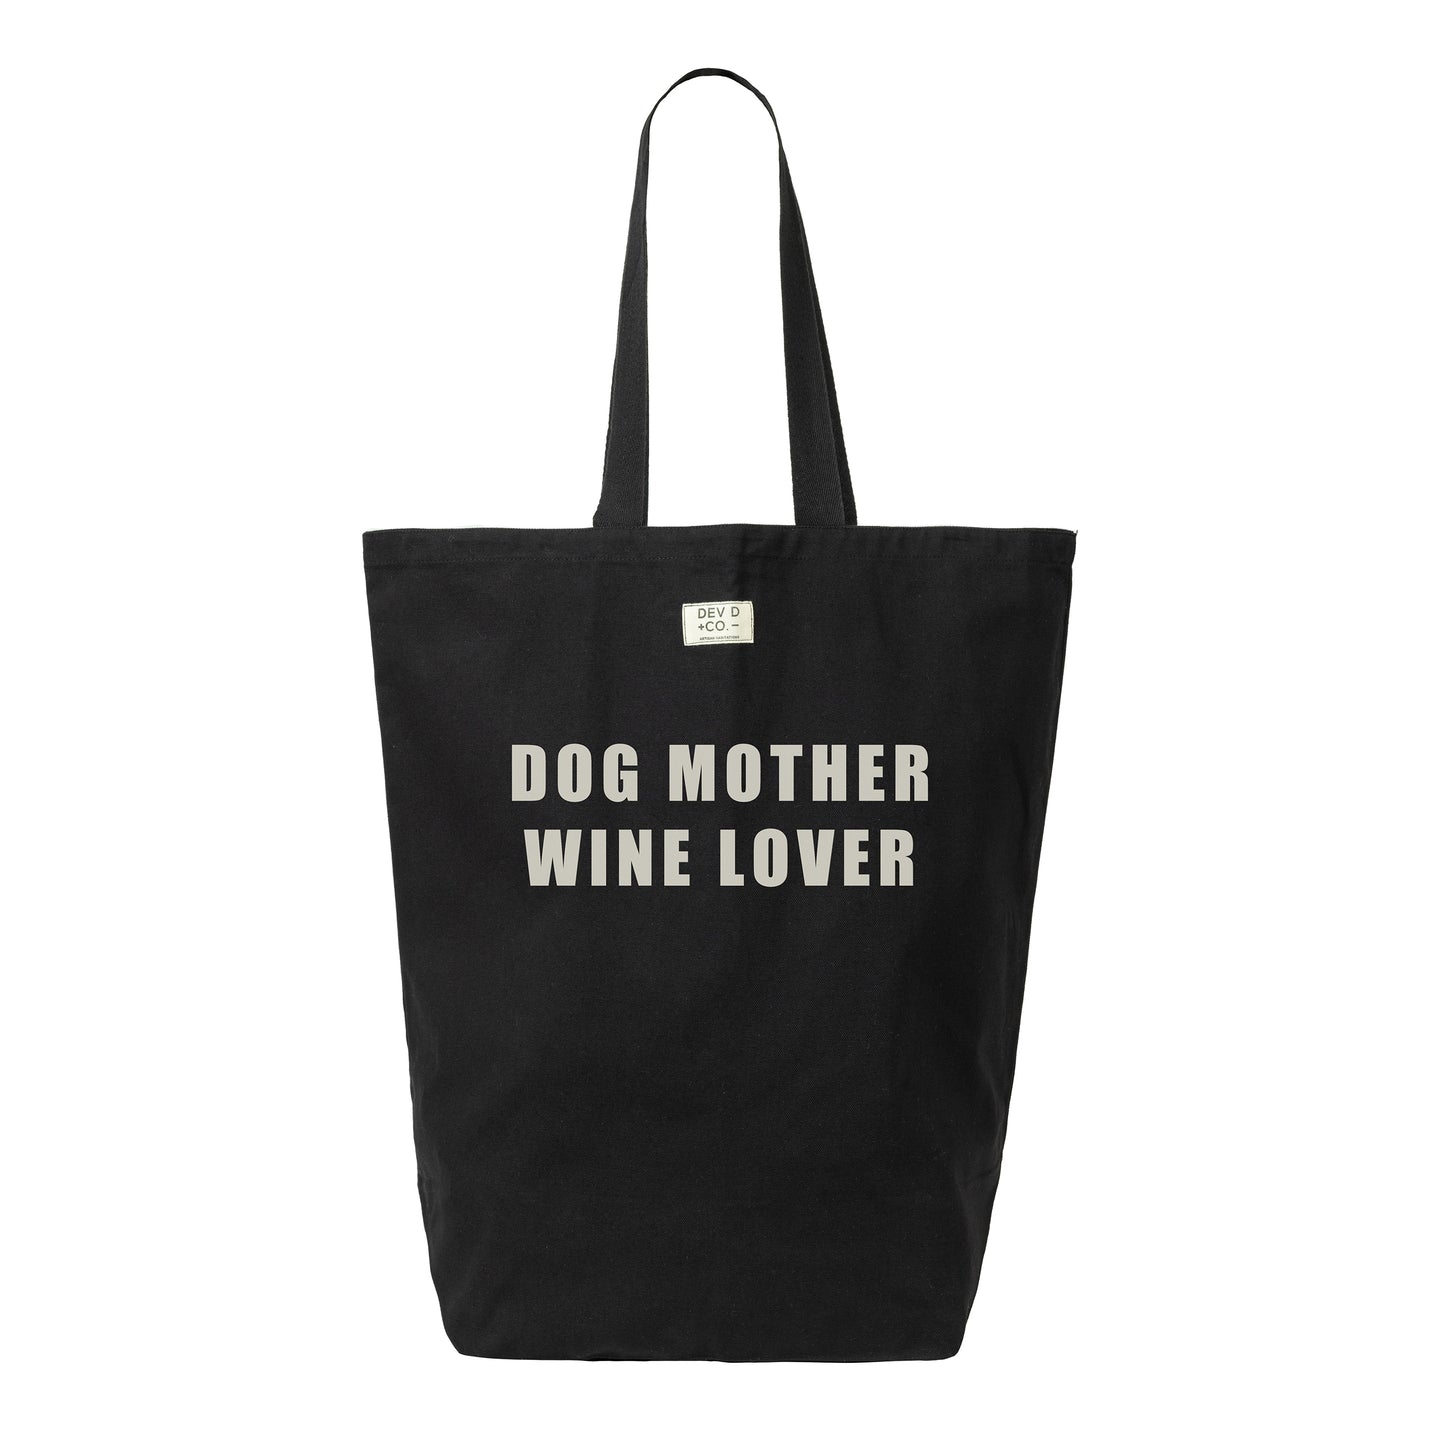 Dog Mother Wine Lover - Canvas Tote Bag with Pocket